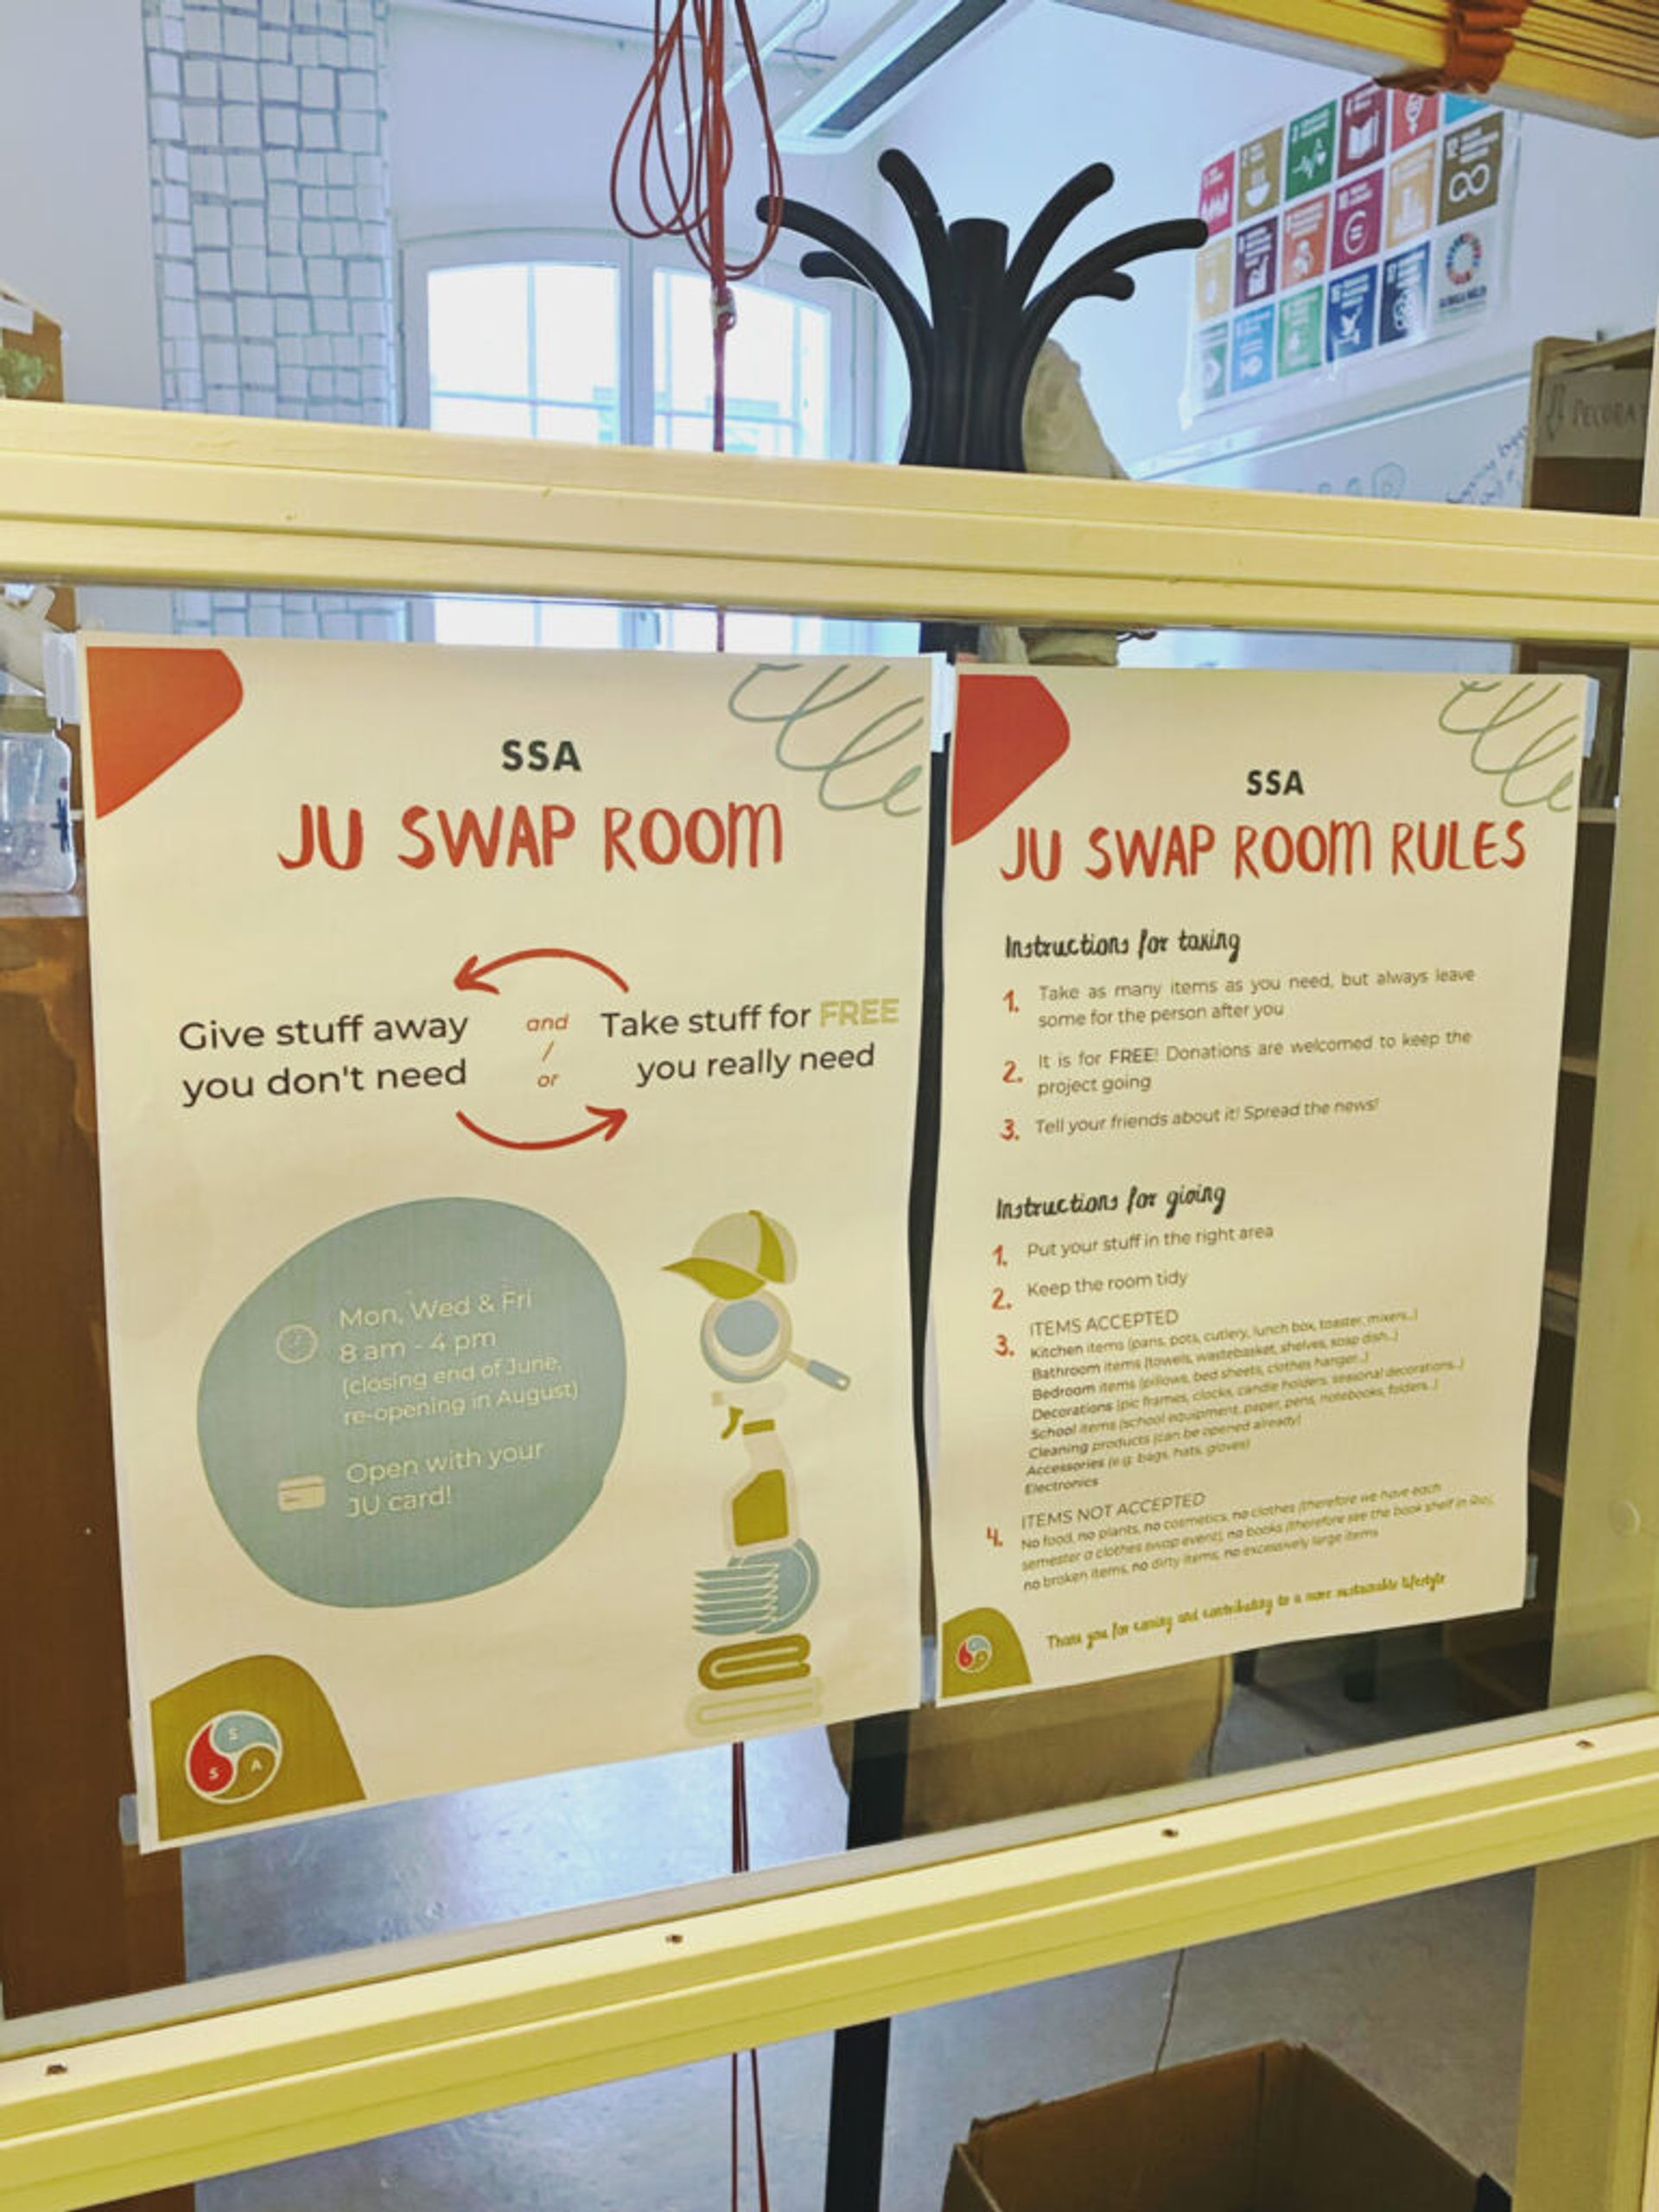 Printed notices outlining the regulations and function of the Jönköping University swap room.